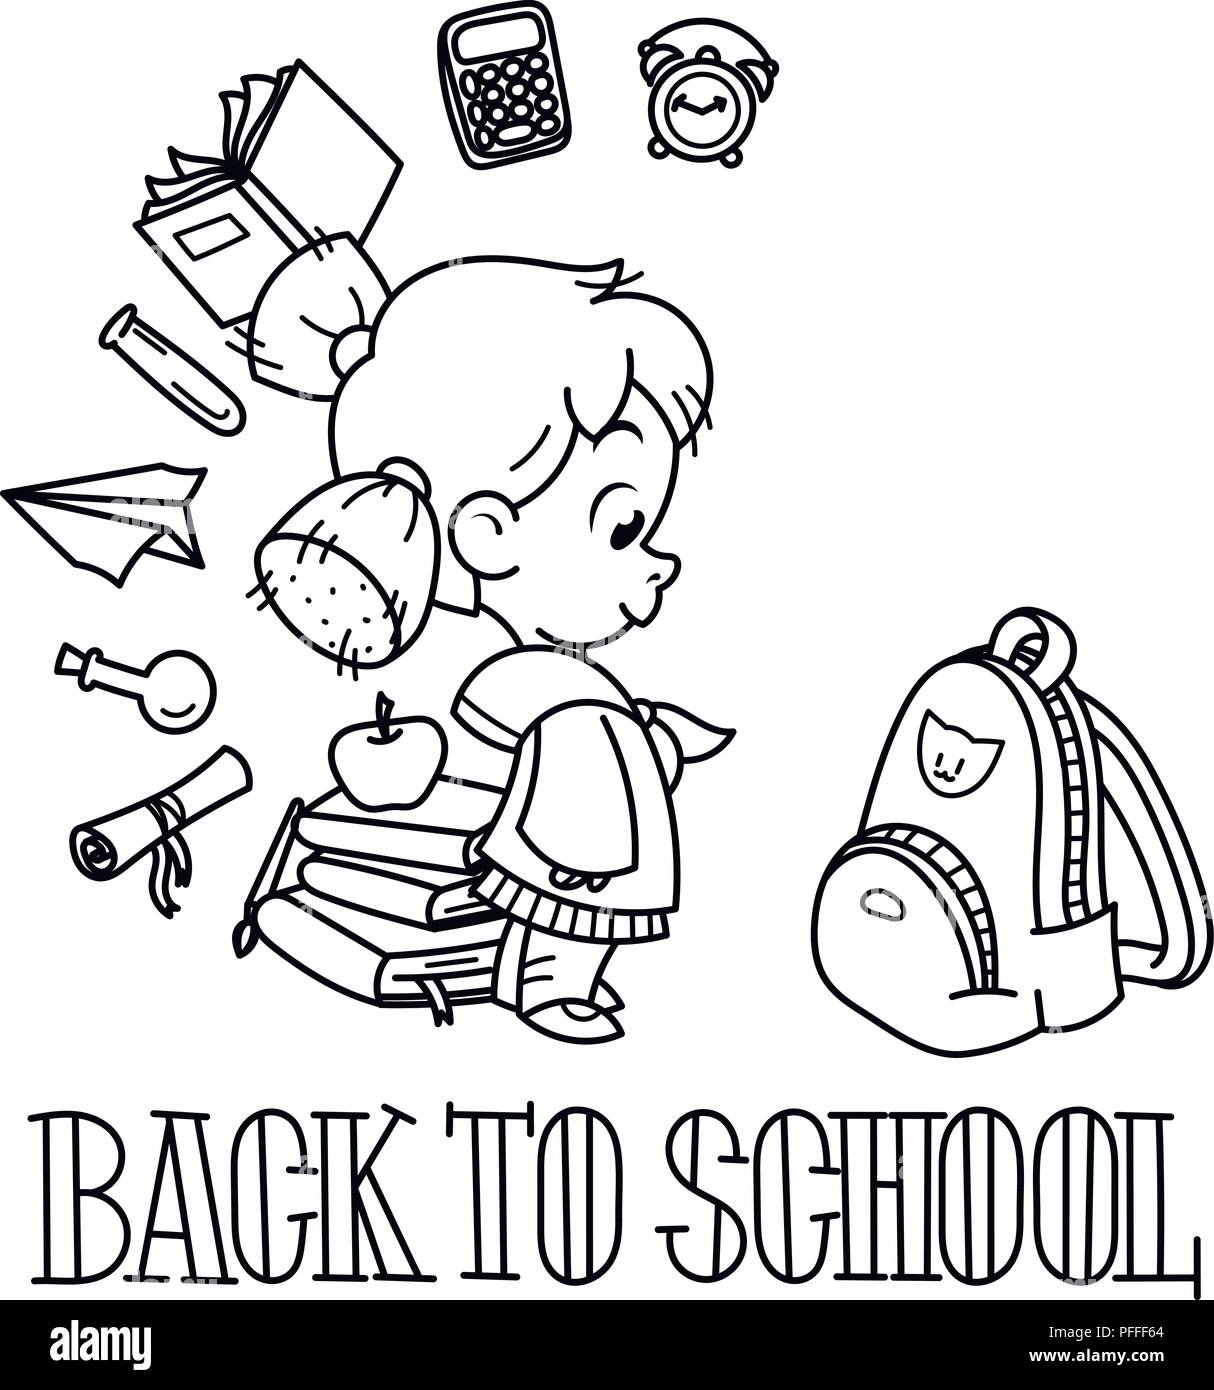 Welcome back to school. Cute school kid ready to education. Design ...